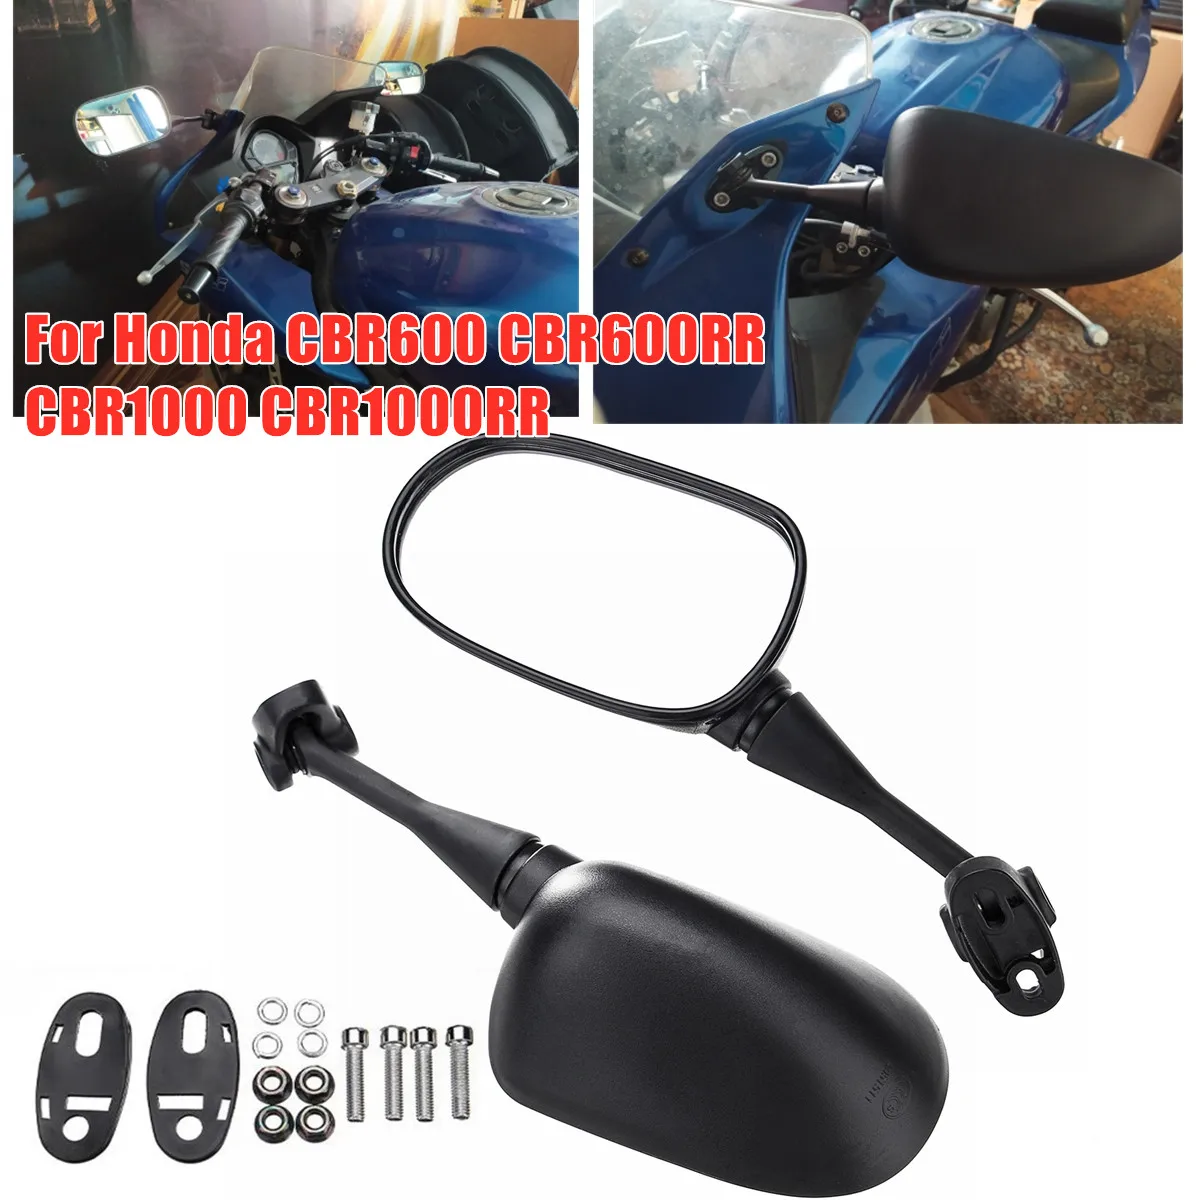 

2pcs 18mm Motorcycle Rearview Rear View Mirrors Glass Back Side Mirror Right Left For Honda CBR600 CBR600RR CBR1000 CBR1000RR